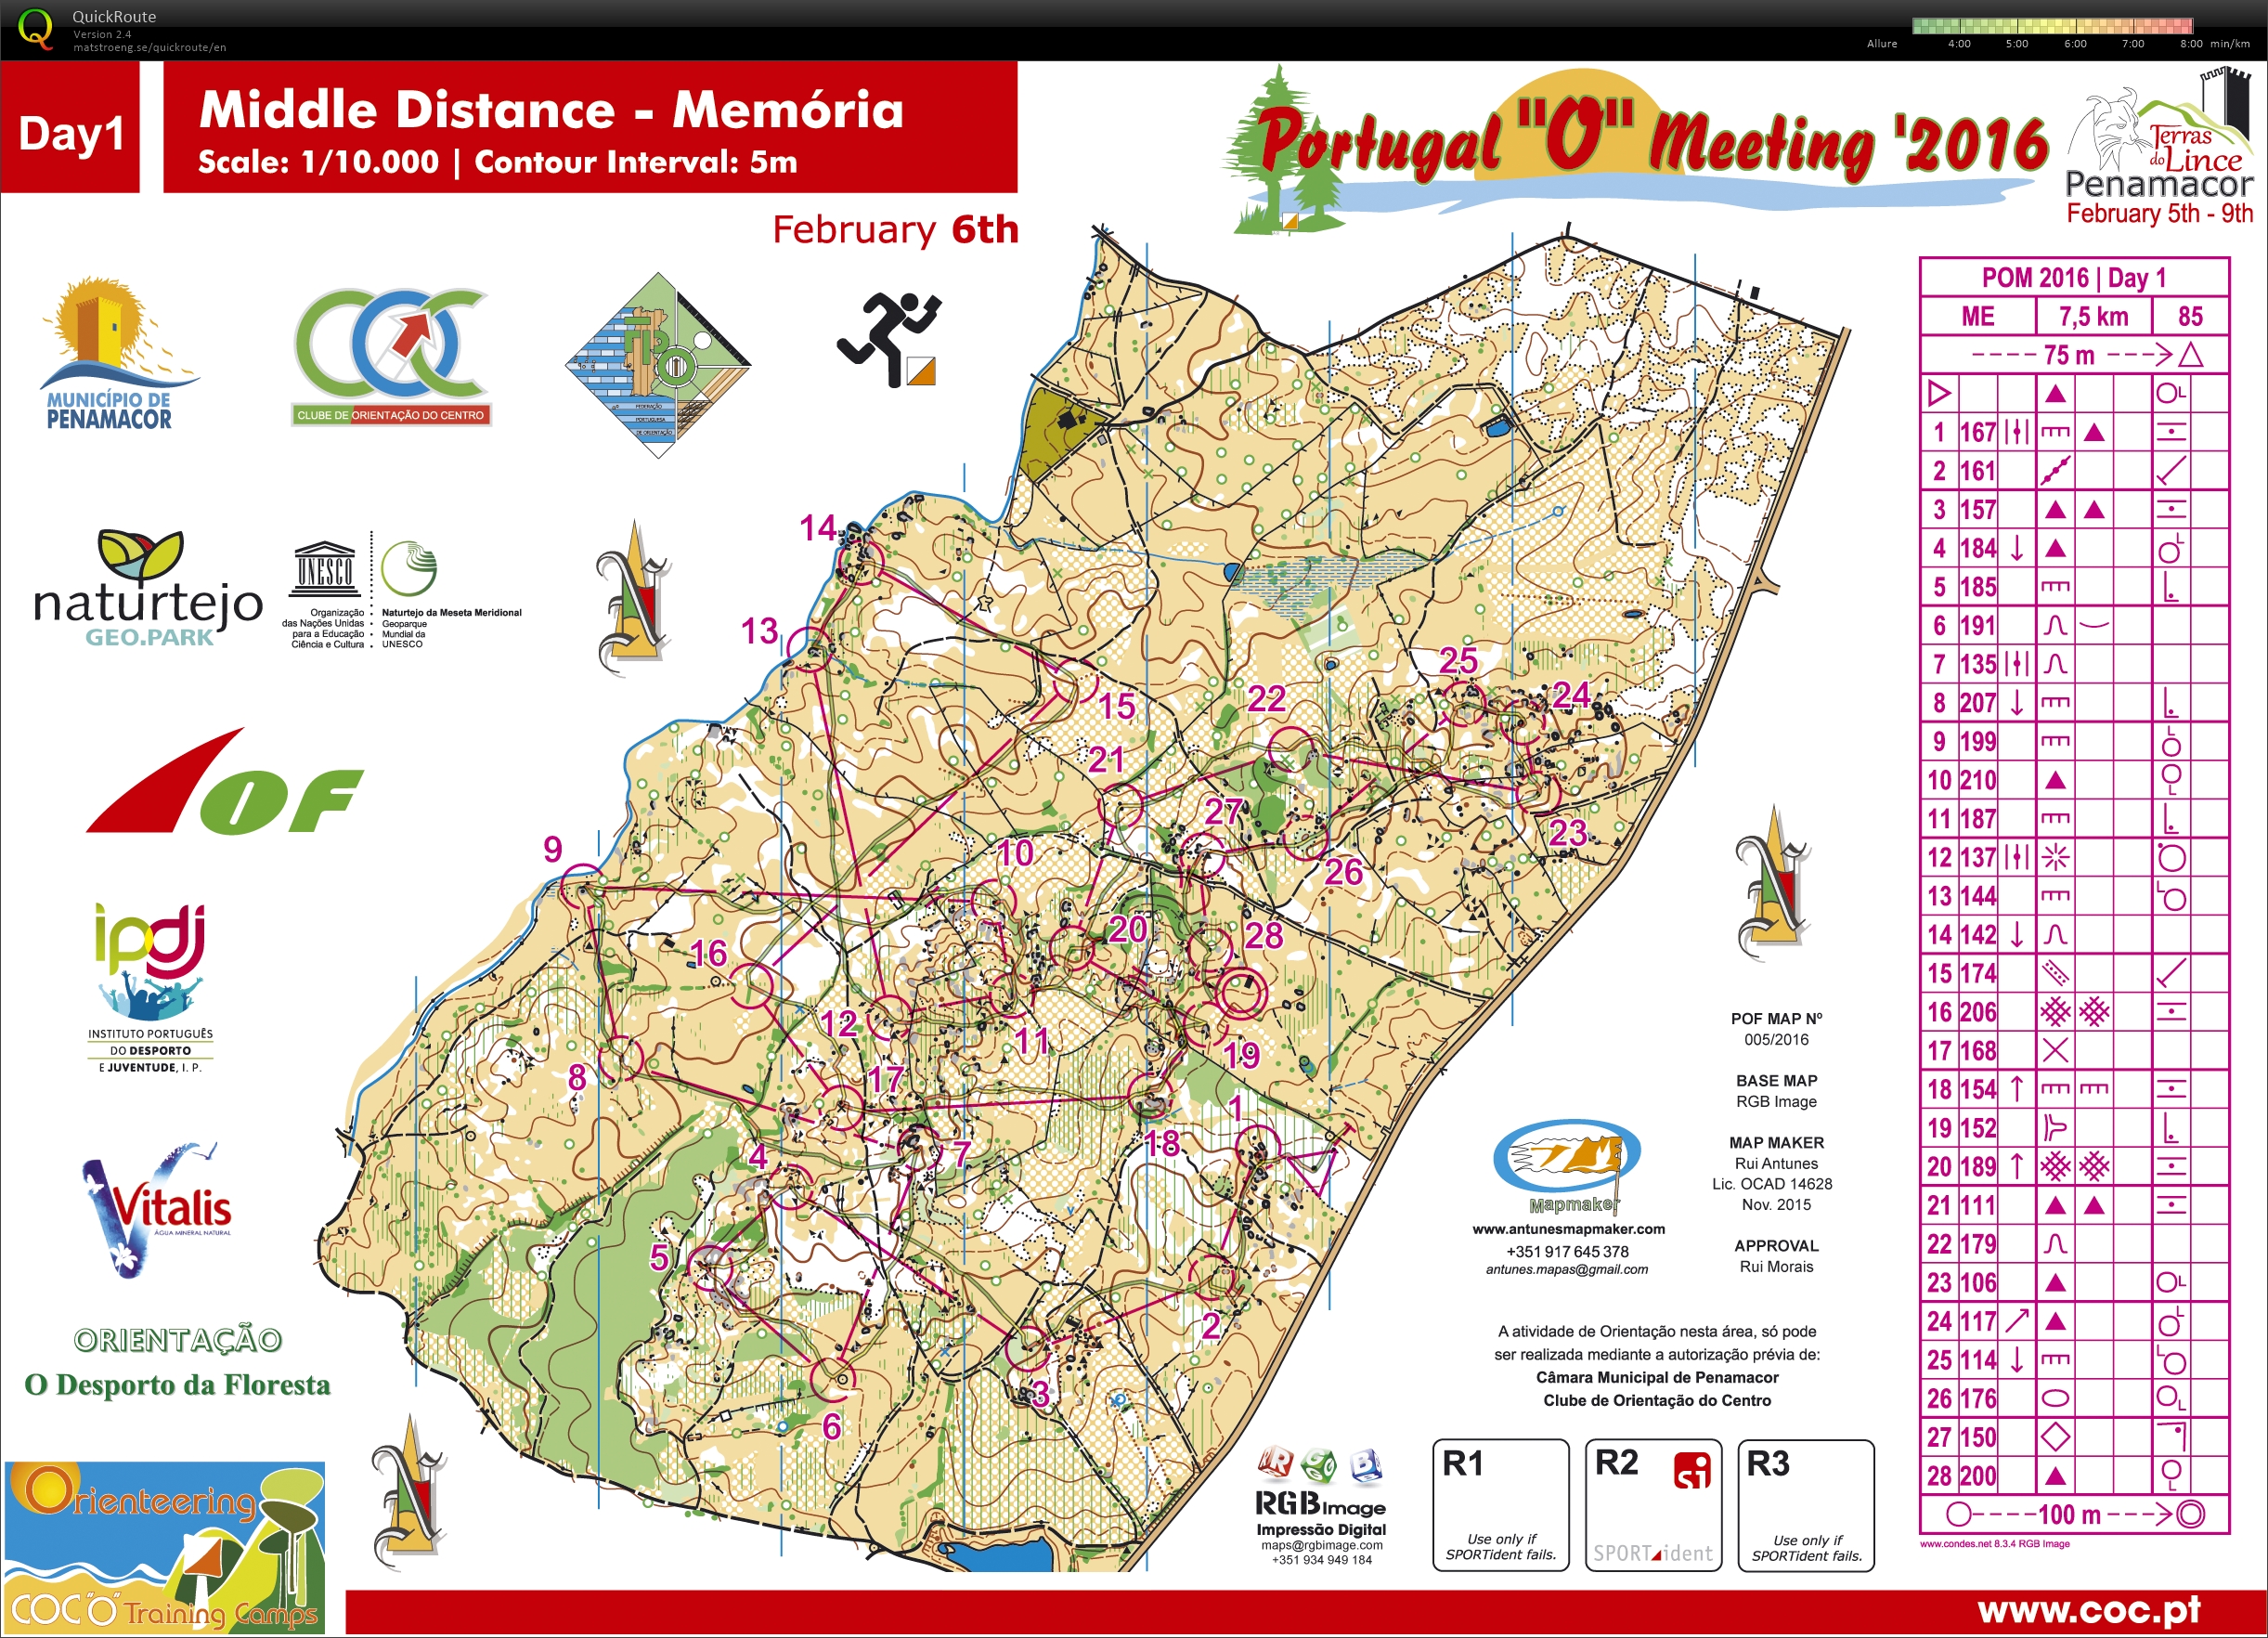 Portugal O Meeting Stage 1 (06-02-2016)